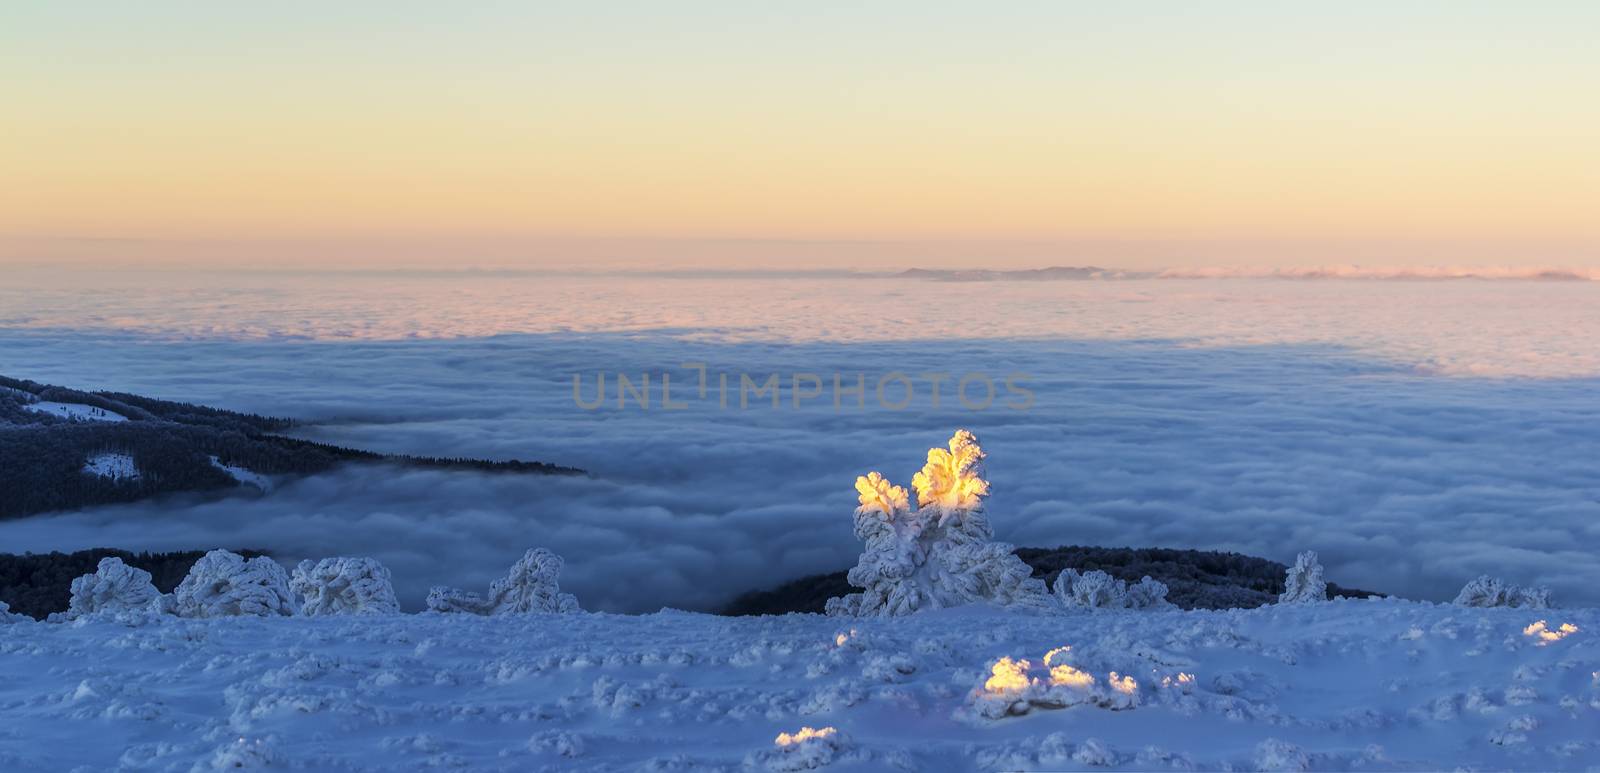 Scenic winter landscape above the clouds. The sky is clear. Dusk. snow-covered tree in the foreground. Clouds on the background blurred